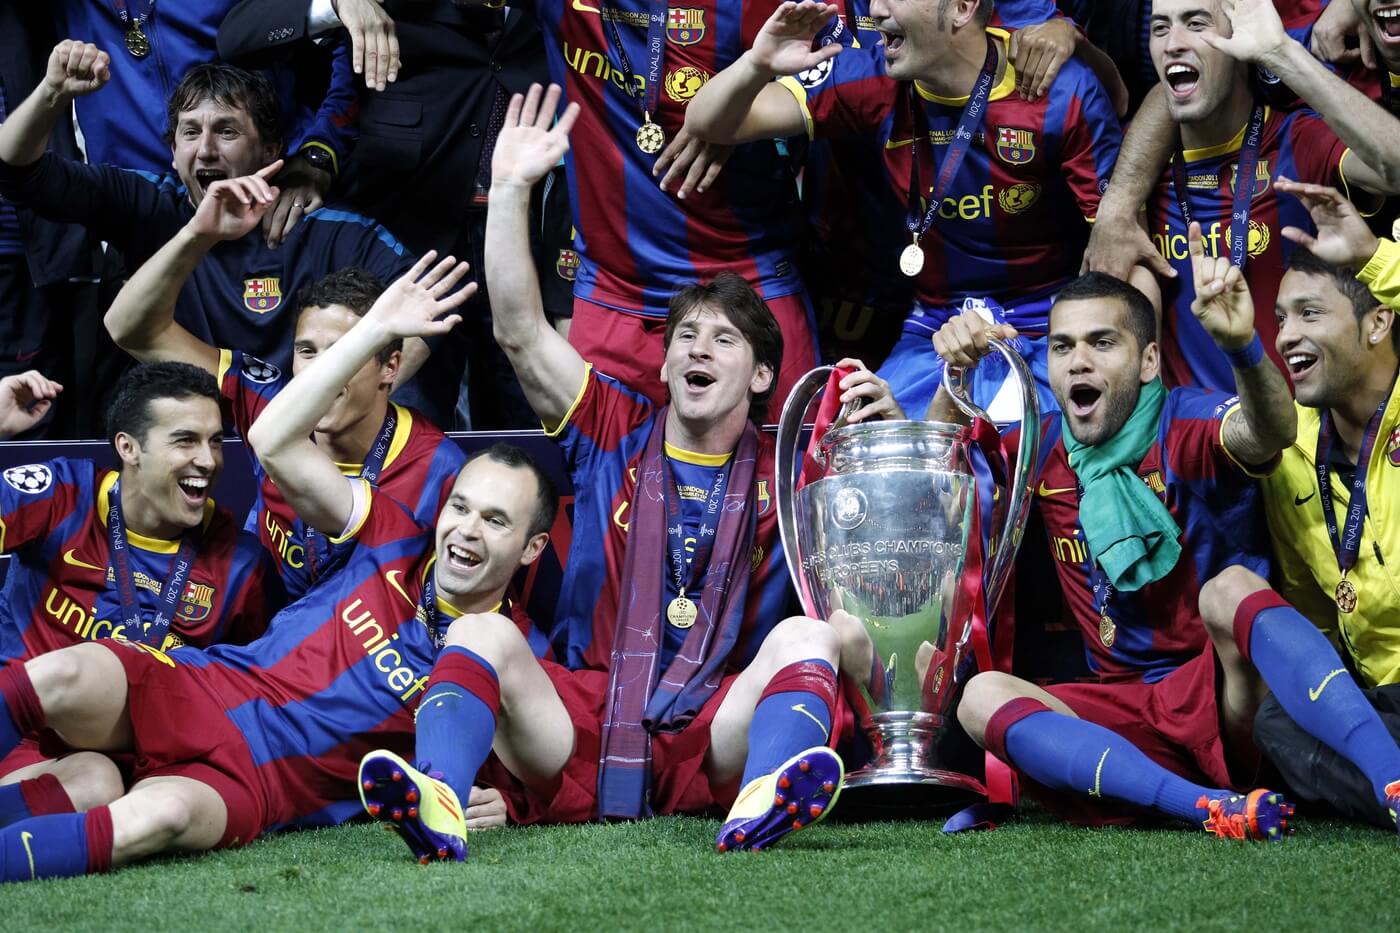 May 28, 2011; London, ENGLAND; FC Barcelona player Lionel Messi (middle) and his teammates celebrate with the championship trophy after defeating Manchester United 3-1 in the 2011 UEFA Champions League final at Wembley Stadium. Mandatory Credit: Walter Luger/GEPA via USA TODAY Sports